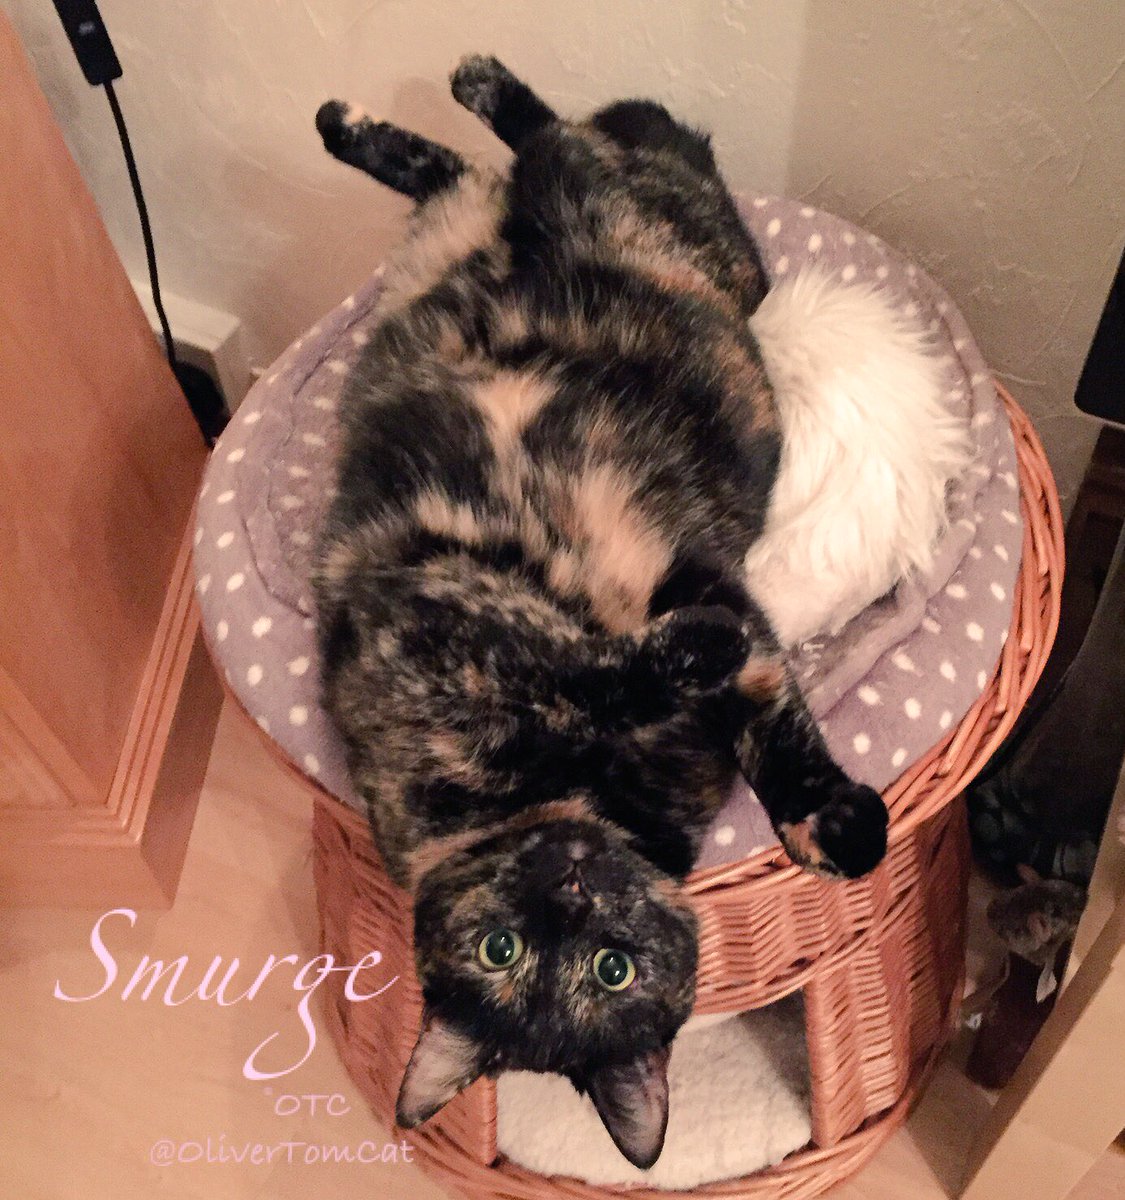 Happy #catboxsunday pals from Smurge who likes to be different! #catbasketsunday (or basket case cat!)Have a great day my furriends💚🐾💚